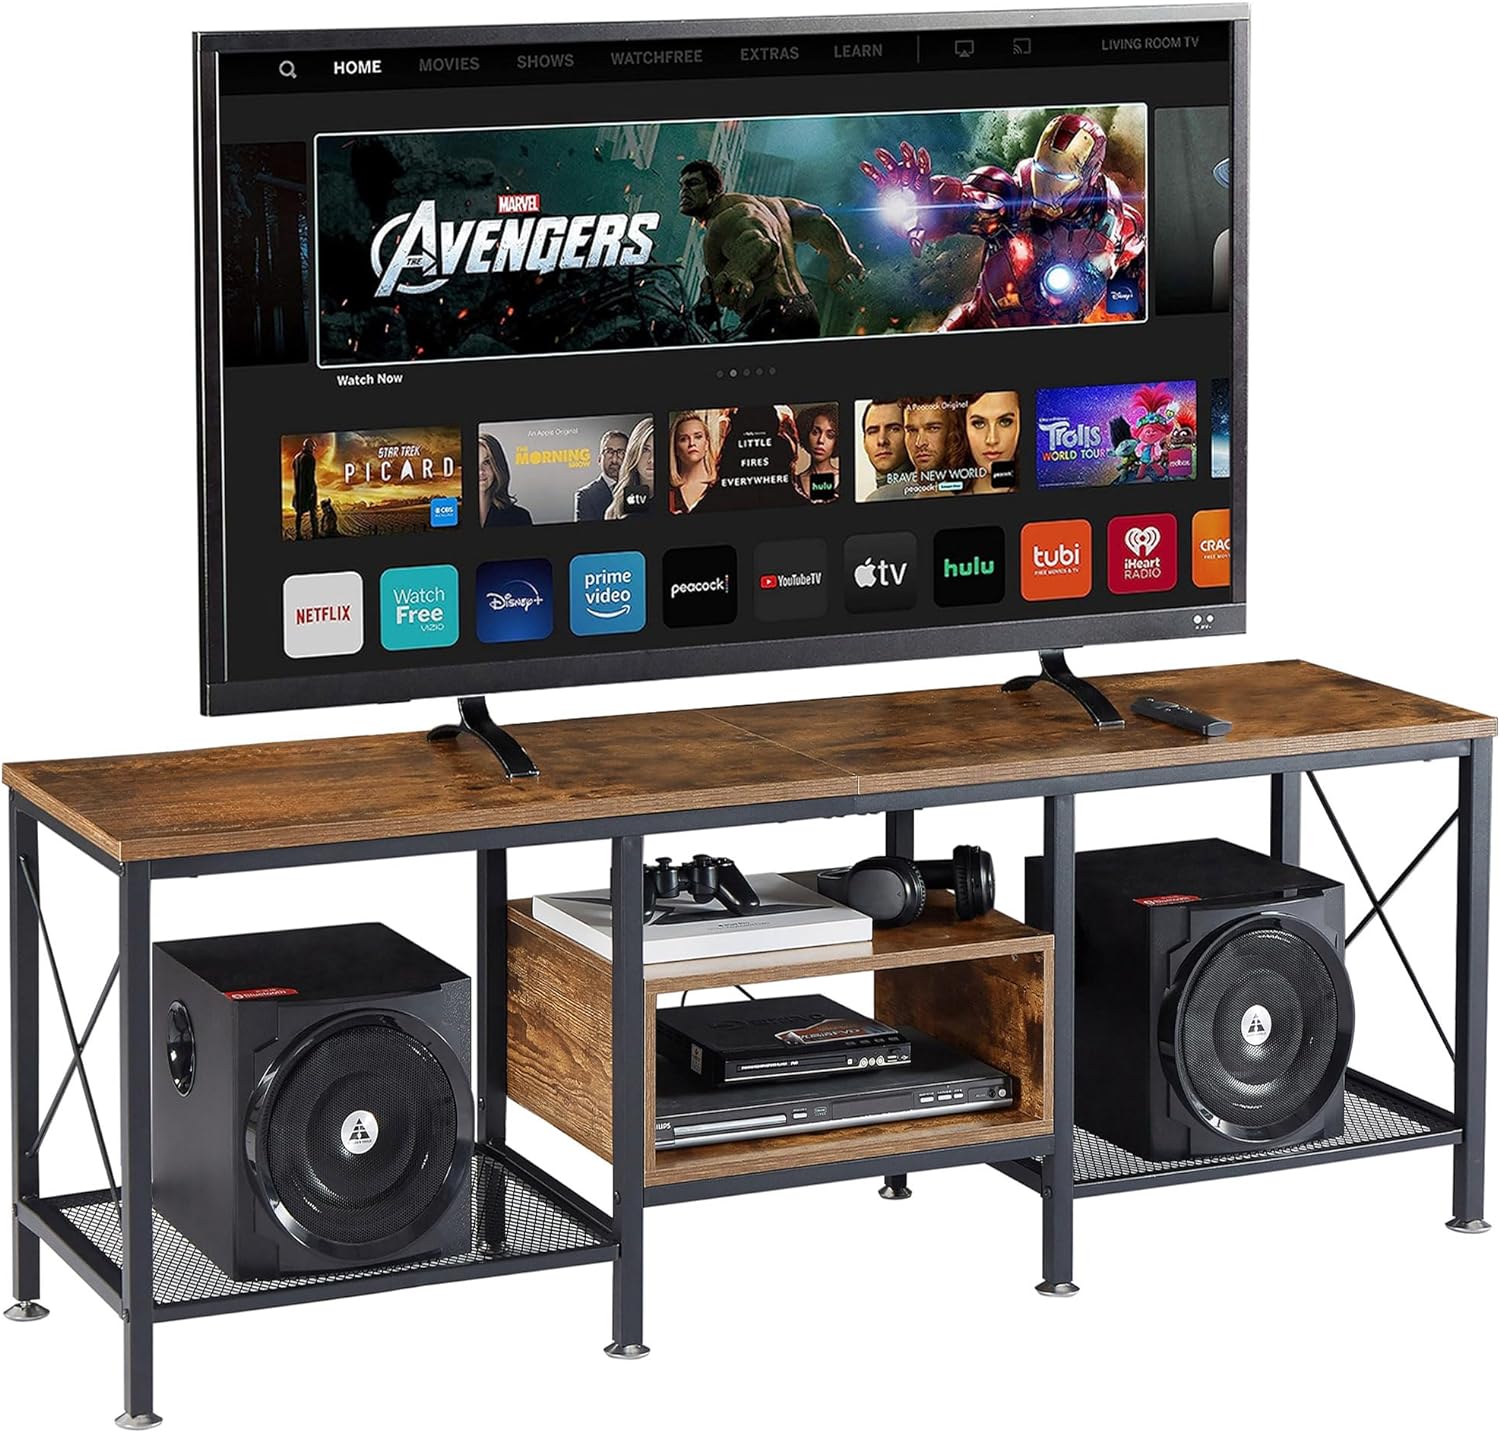 I needed a sturdy, attractive, but reasonably priced TV stand for a 75